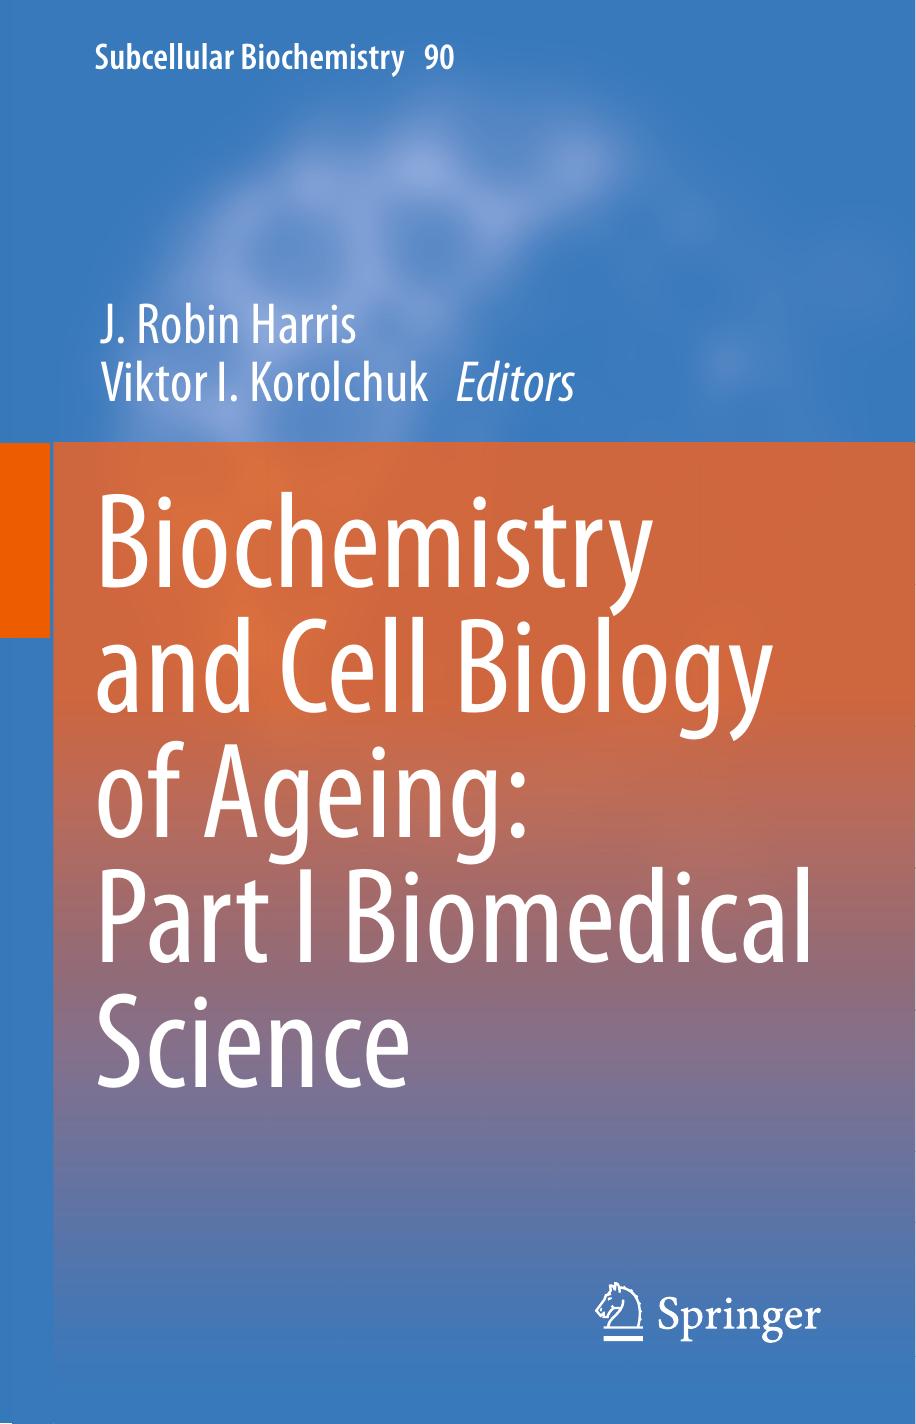 Biochemistry and Cell Biology of Ageing Part I Biomedical Science 2018